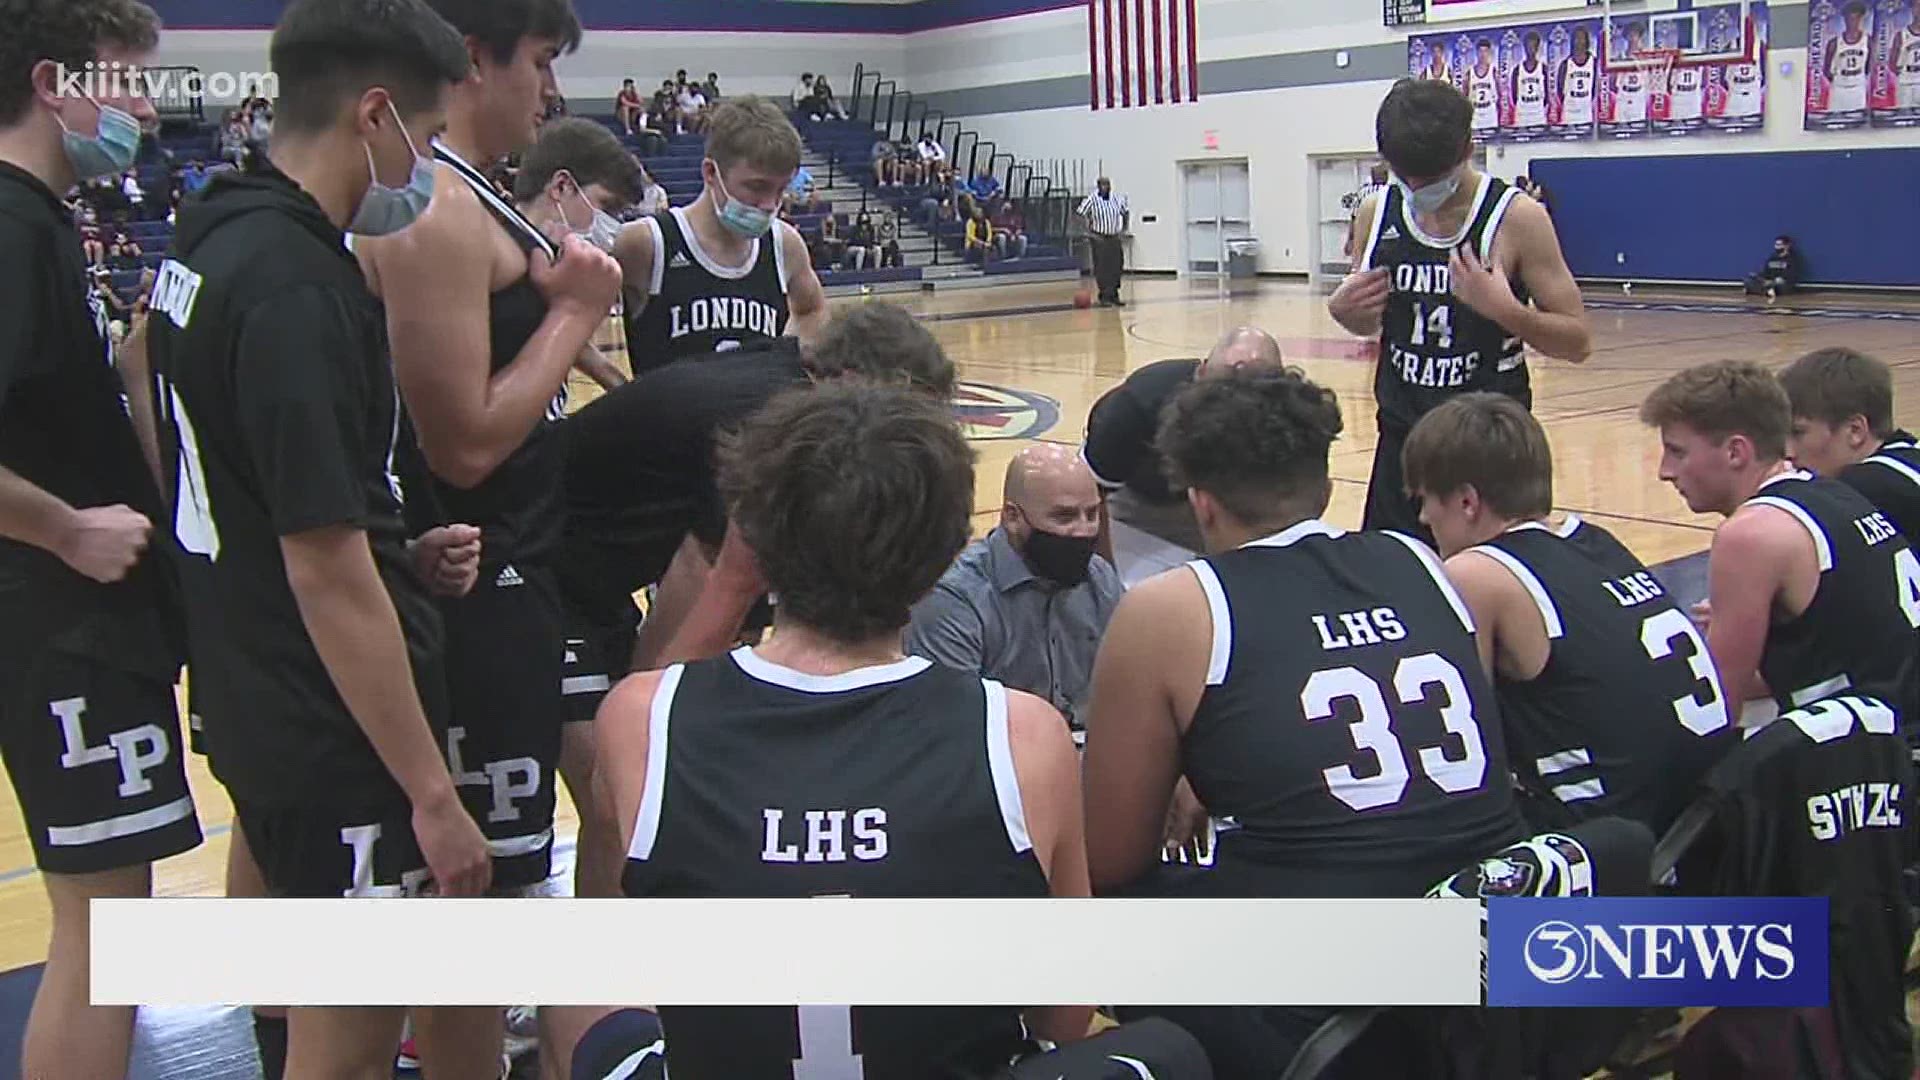 #4 London advances to the region semifinal for the second straight year with a 77-75 win over #8 Aransas Pass.